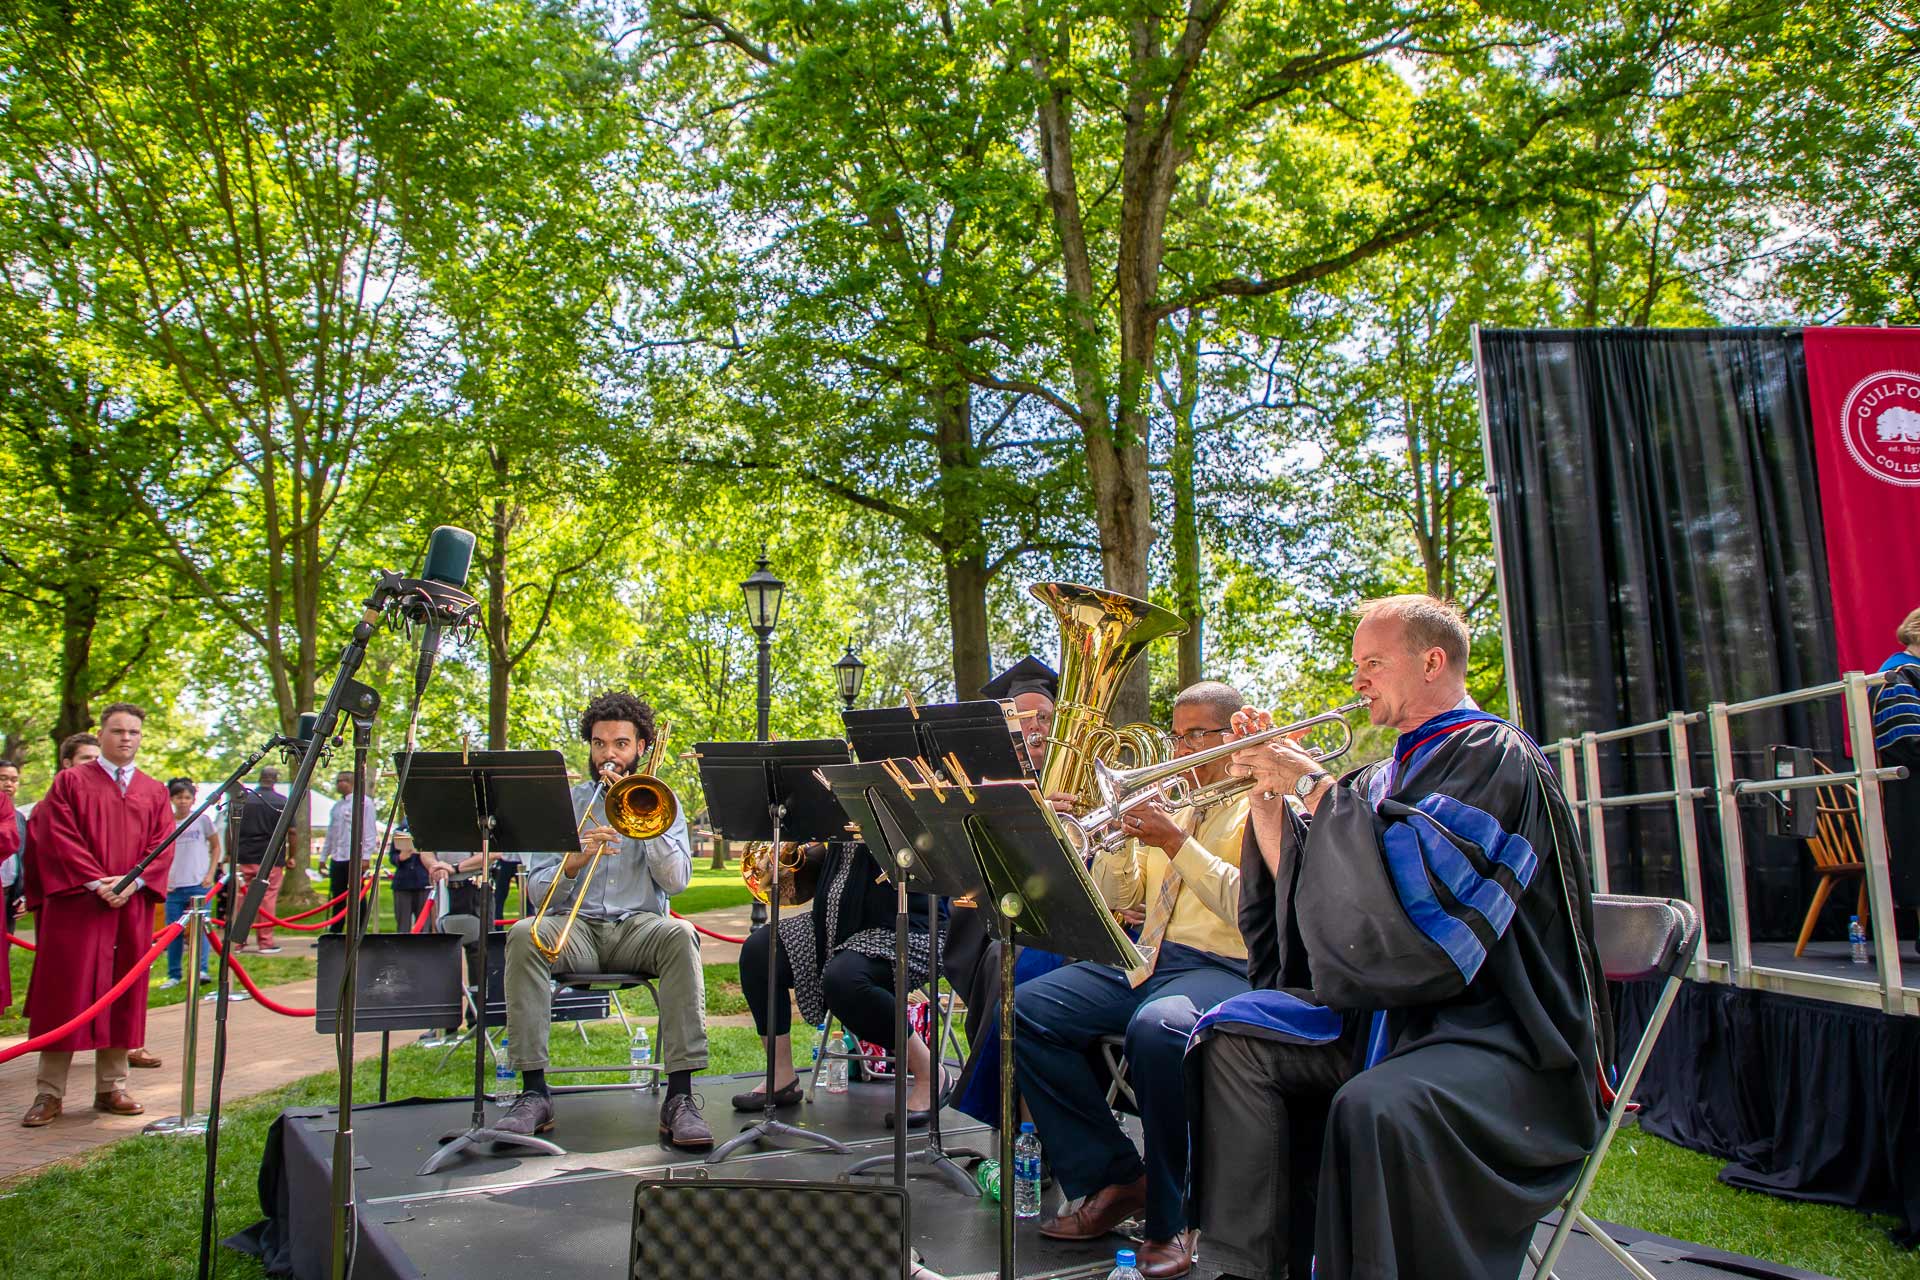 A band plays music on the Quad after Commencement.